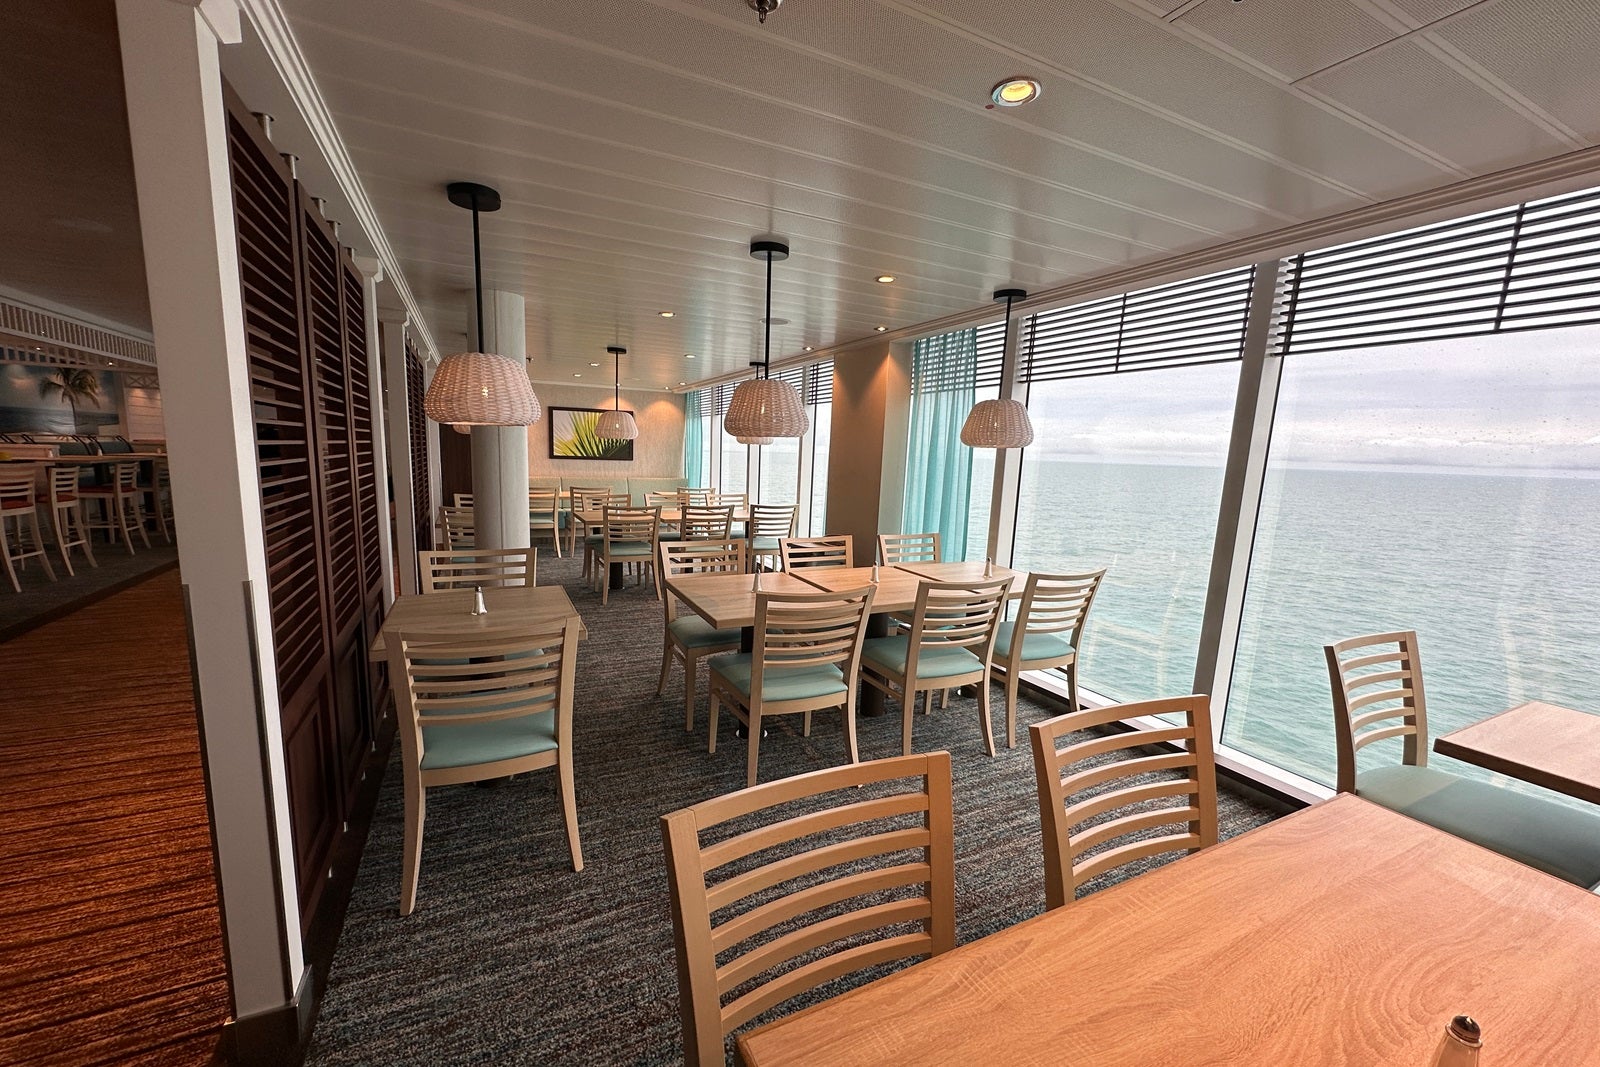 Tables and chairs in a cruise ship buffet